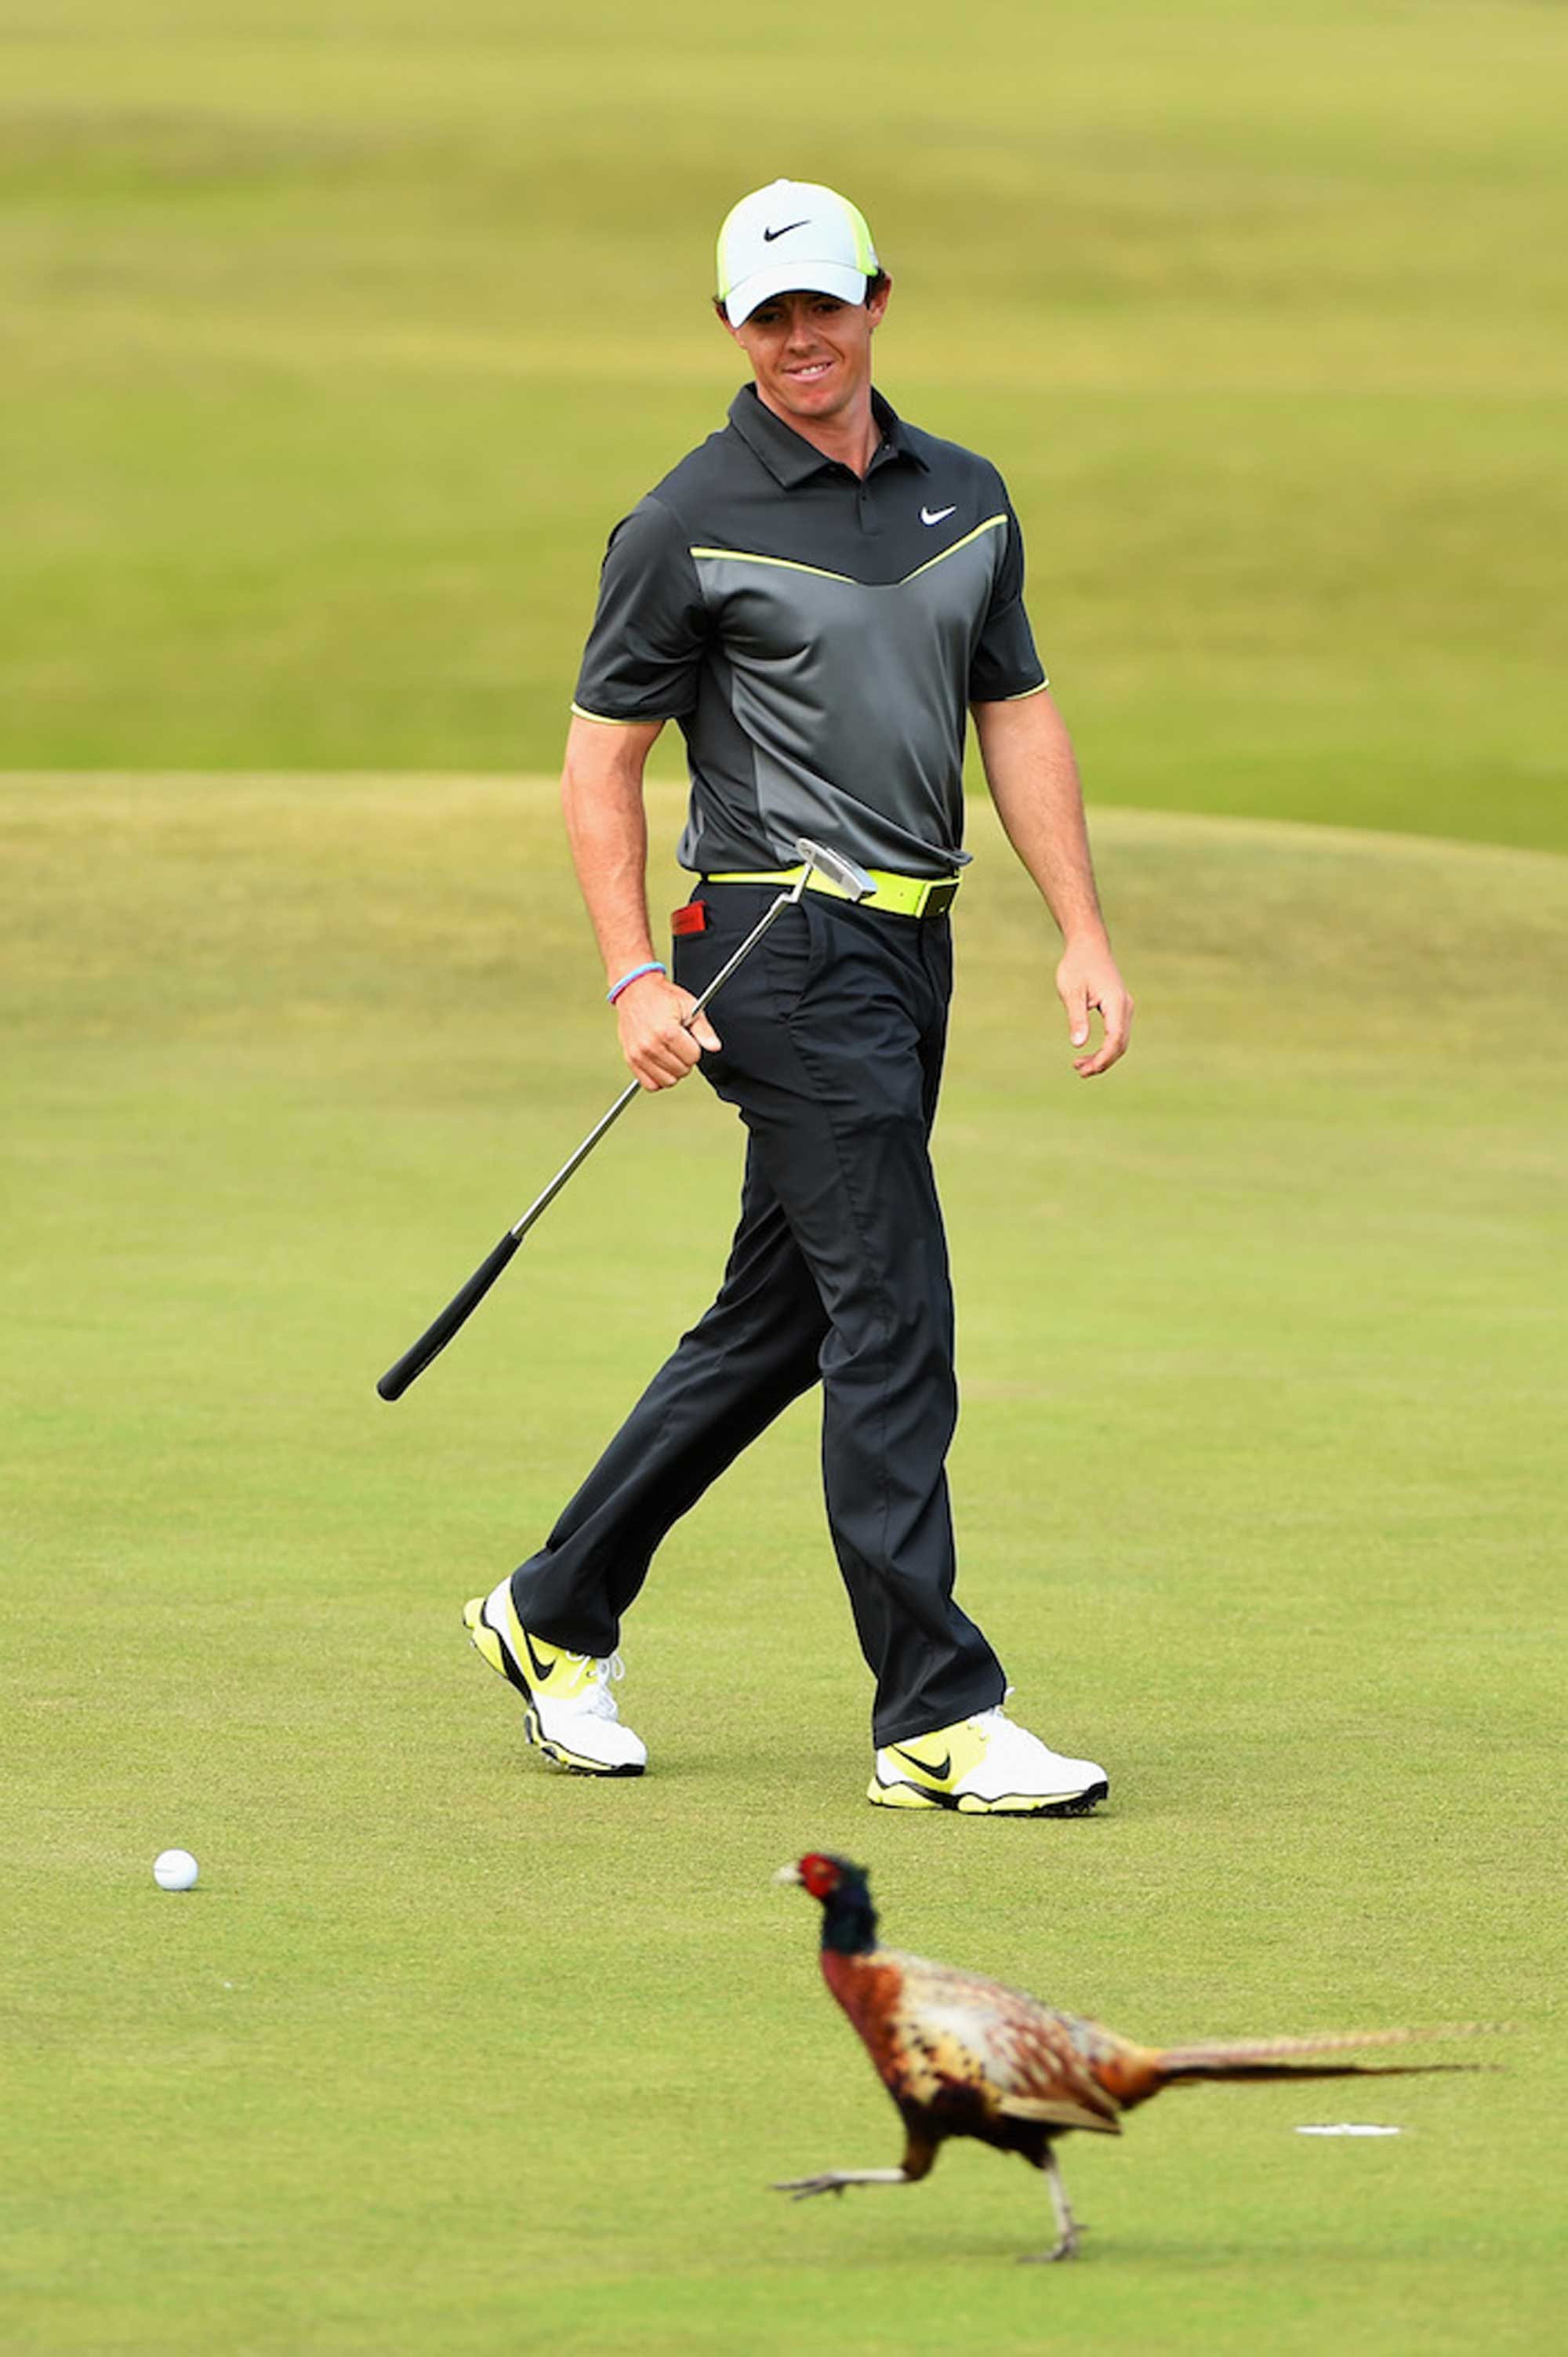 Green and pheasant land - Rory on his way to victory in 2014.